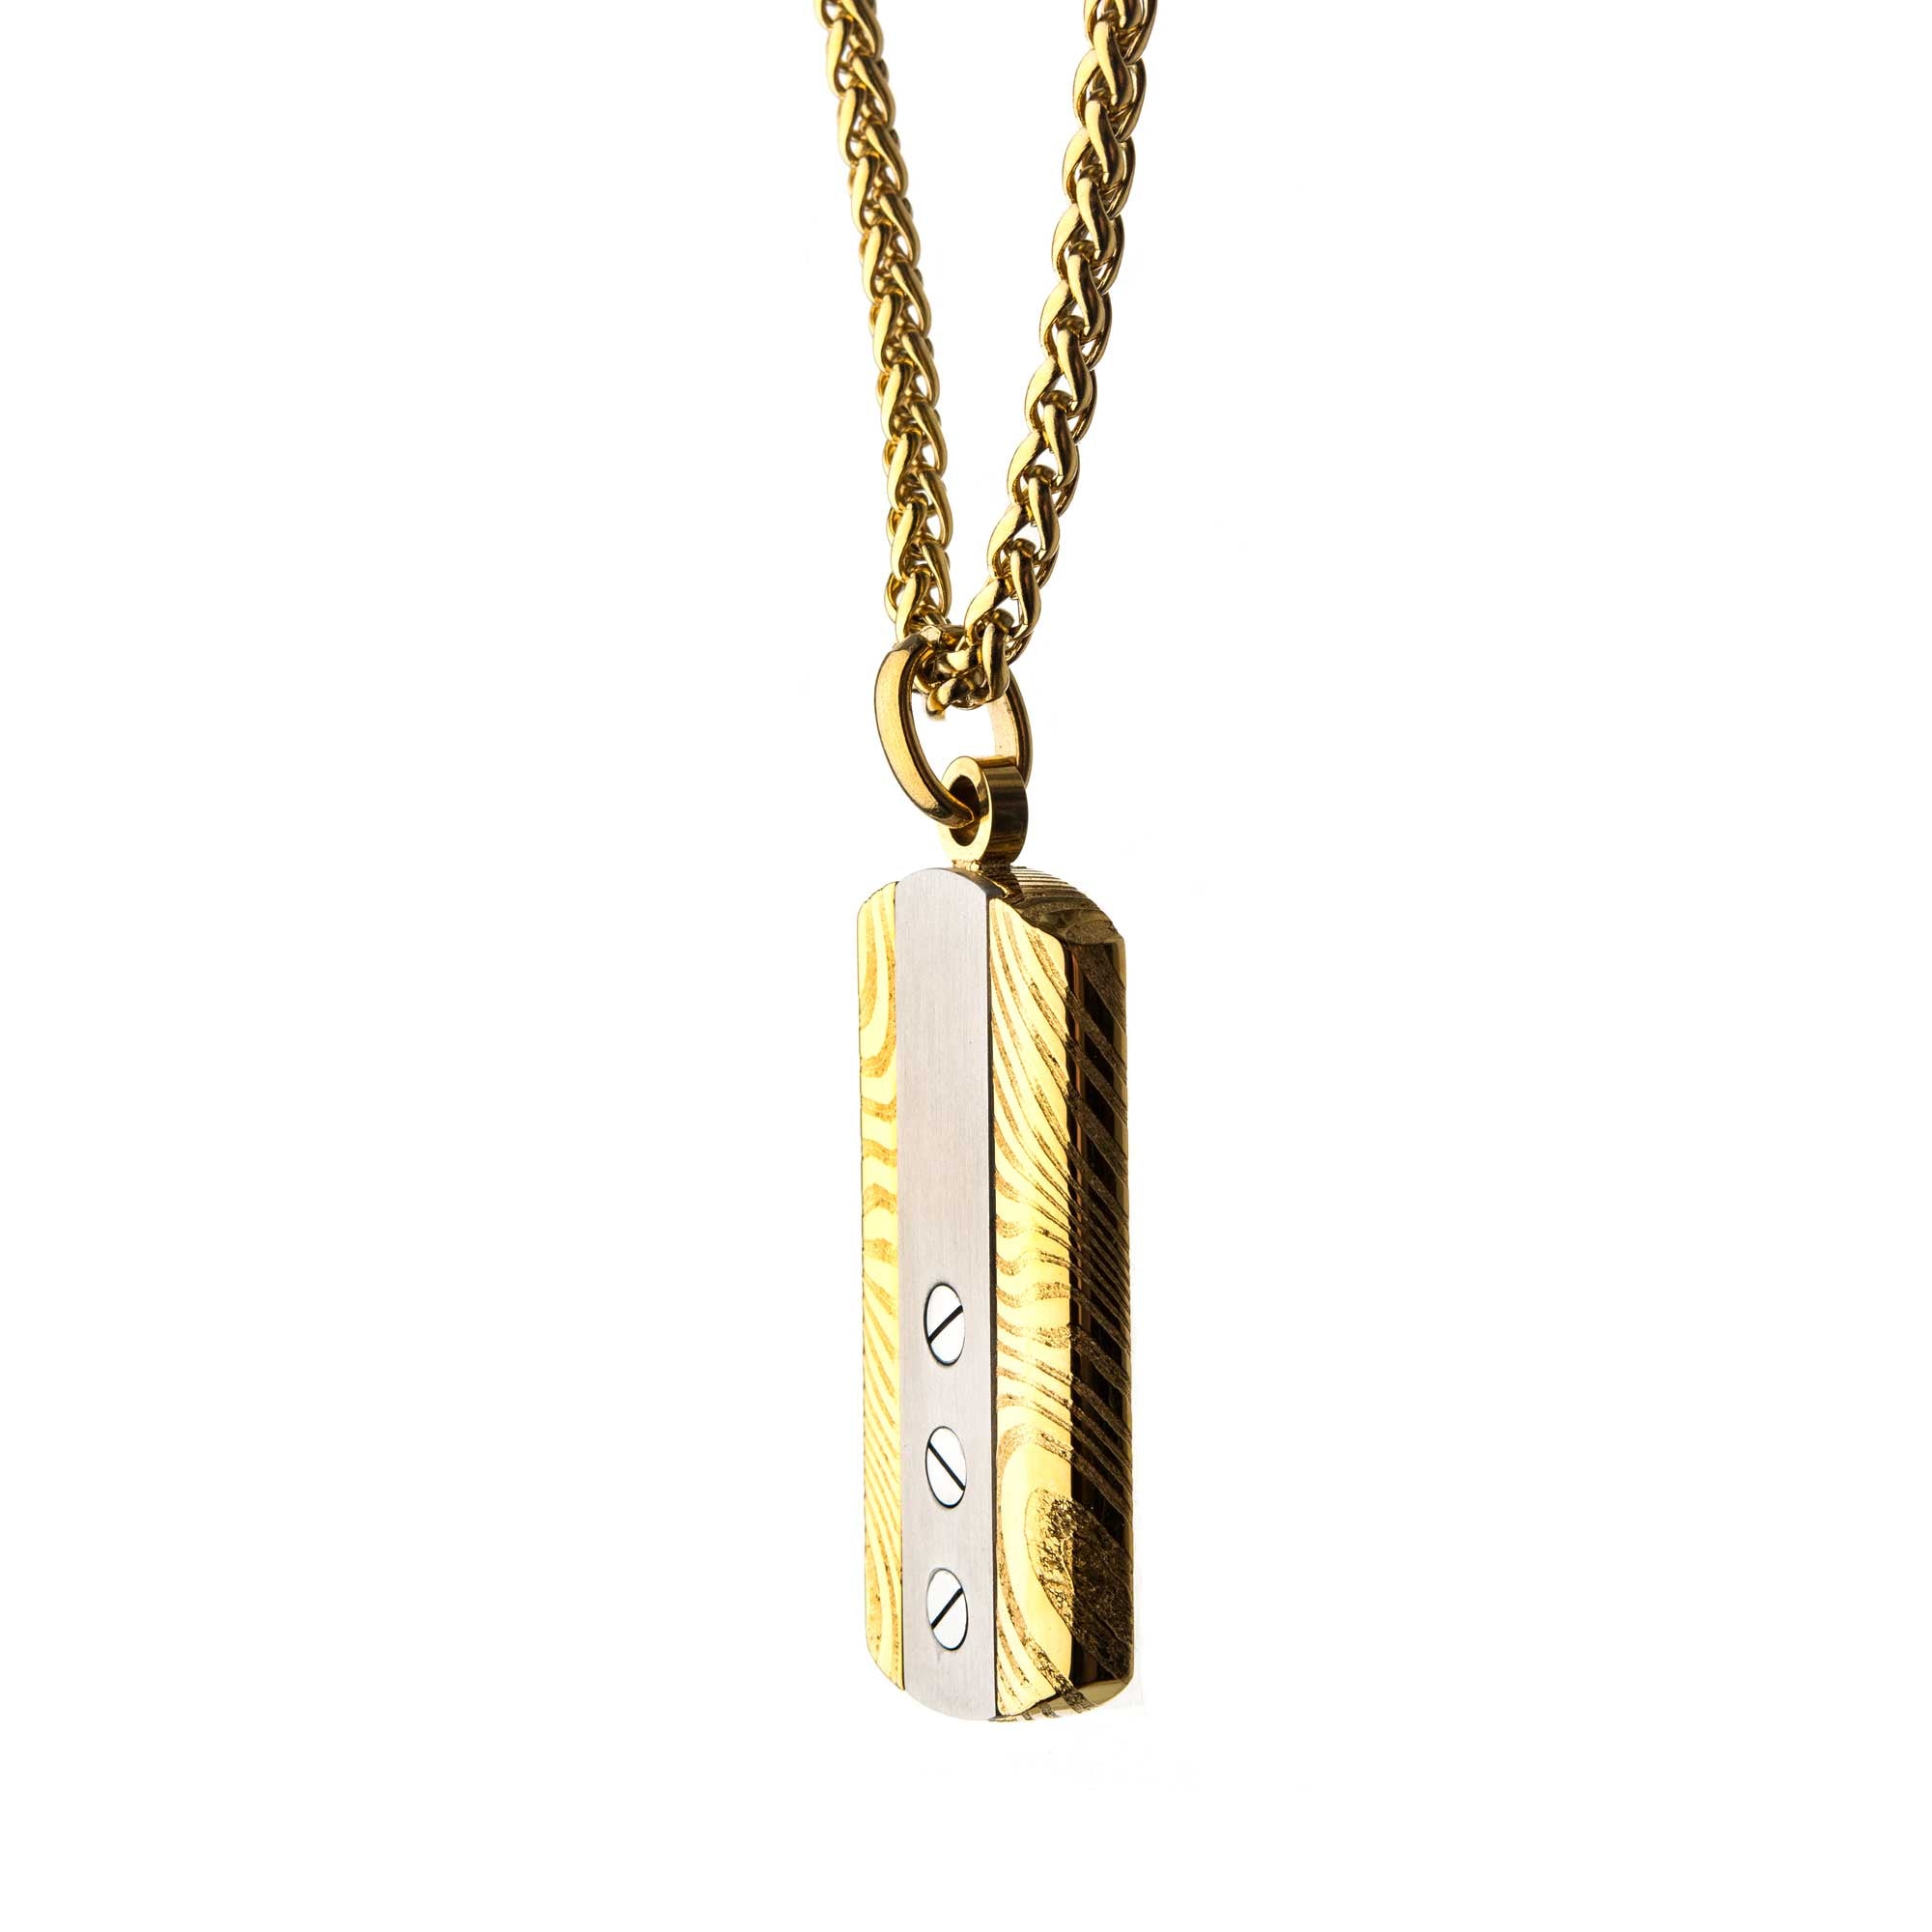 Stainless Steel & Gold Plated Screw Damascus Dog Tag Pendant with Chain